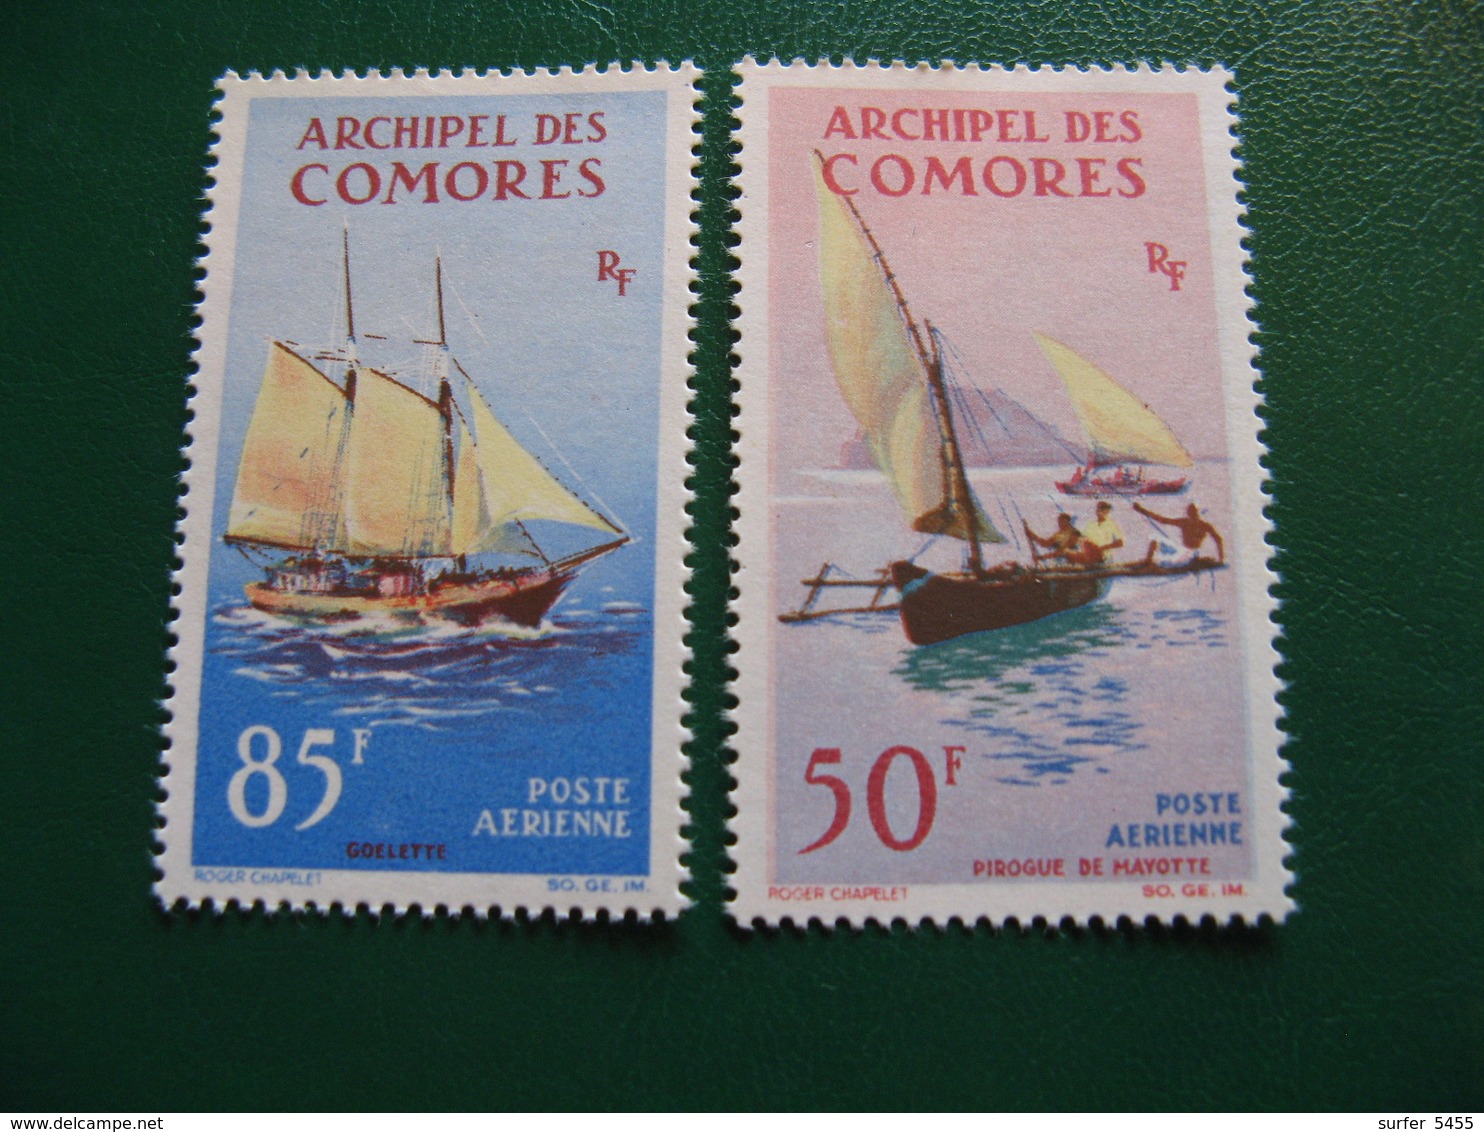 COMORES YVERT POSTE AERIENNE N° 10/11 TIMBRES NEUFS** LUXE COTE 9,50 EUROS - Unused Stamps